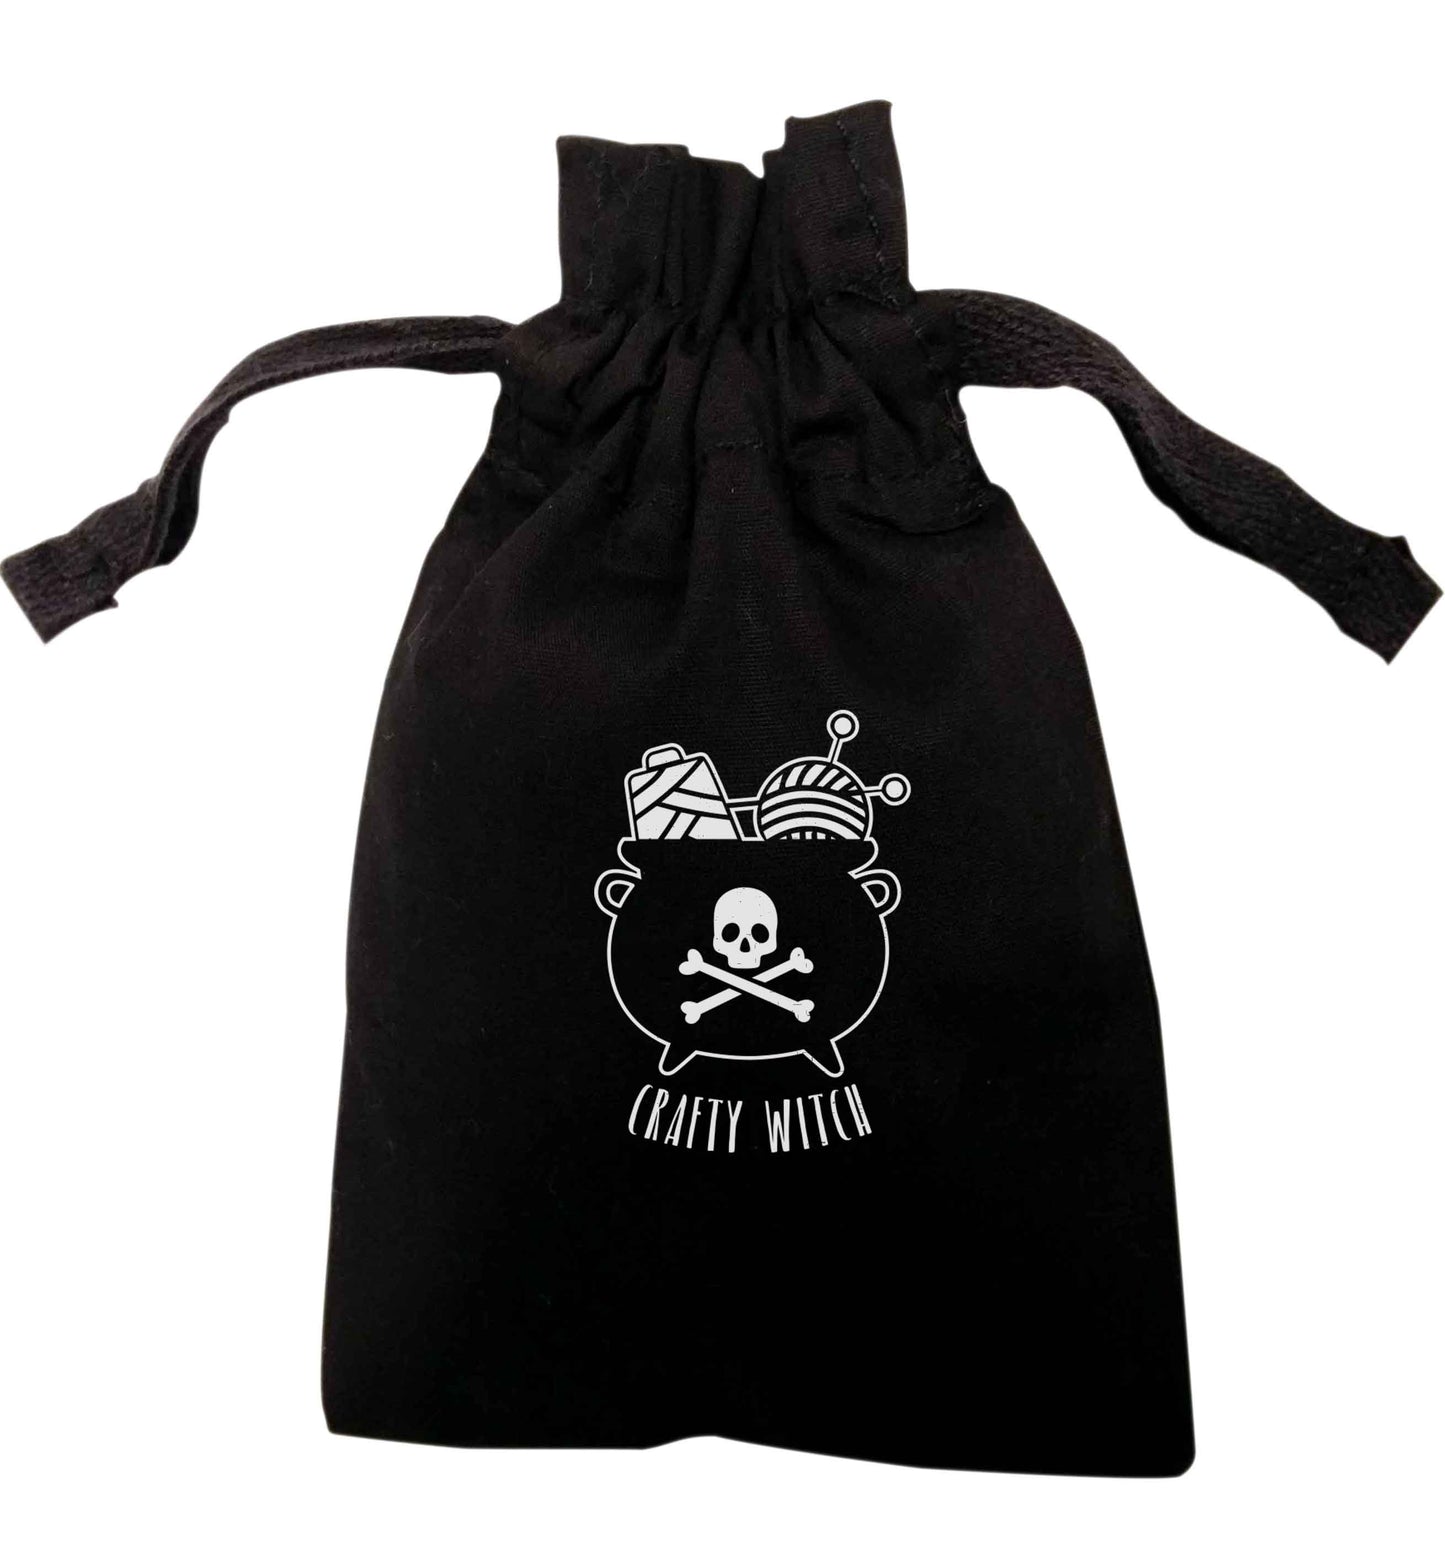 Crafty witch | XS - L | Pouch / Drawstring bag / Sack | Organic Cotton | Bulk discounts available!